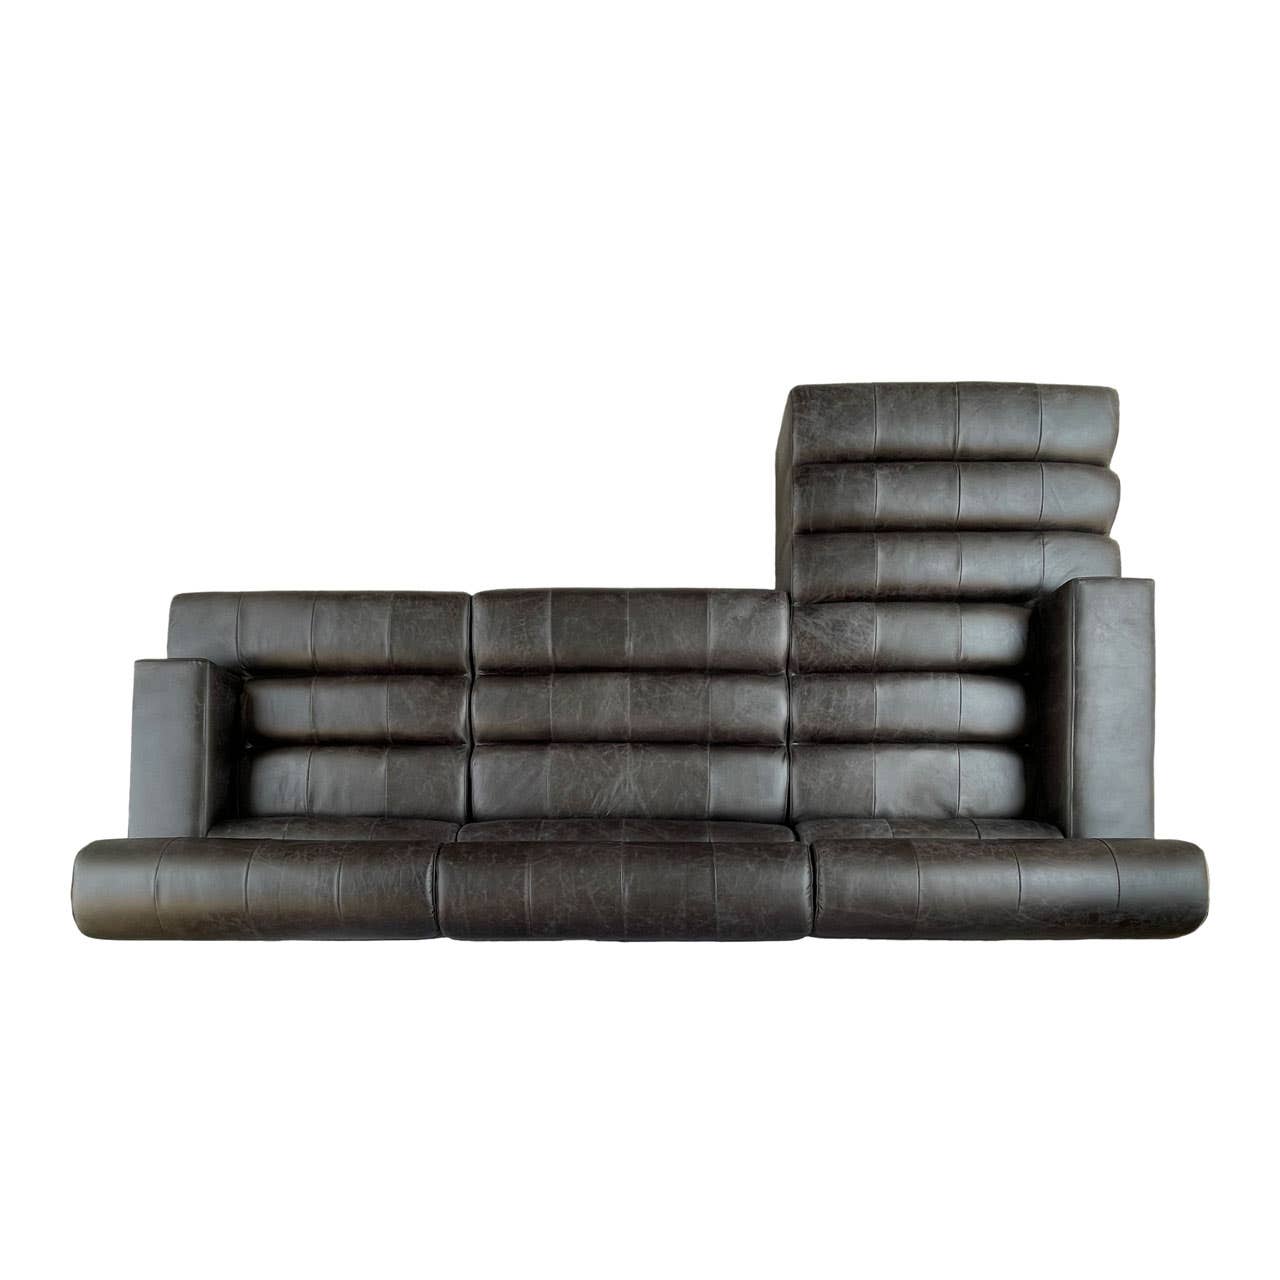 King Distressed Slate Right Chaise